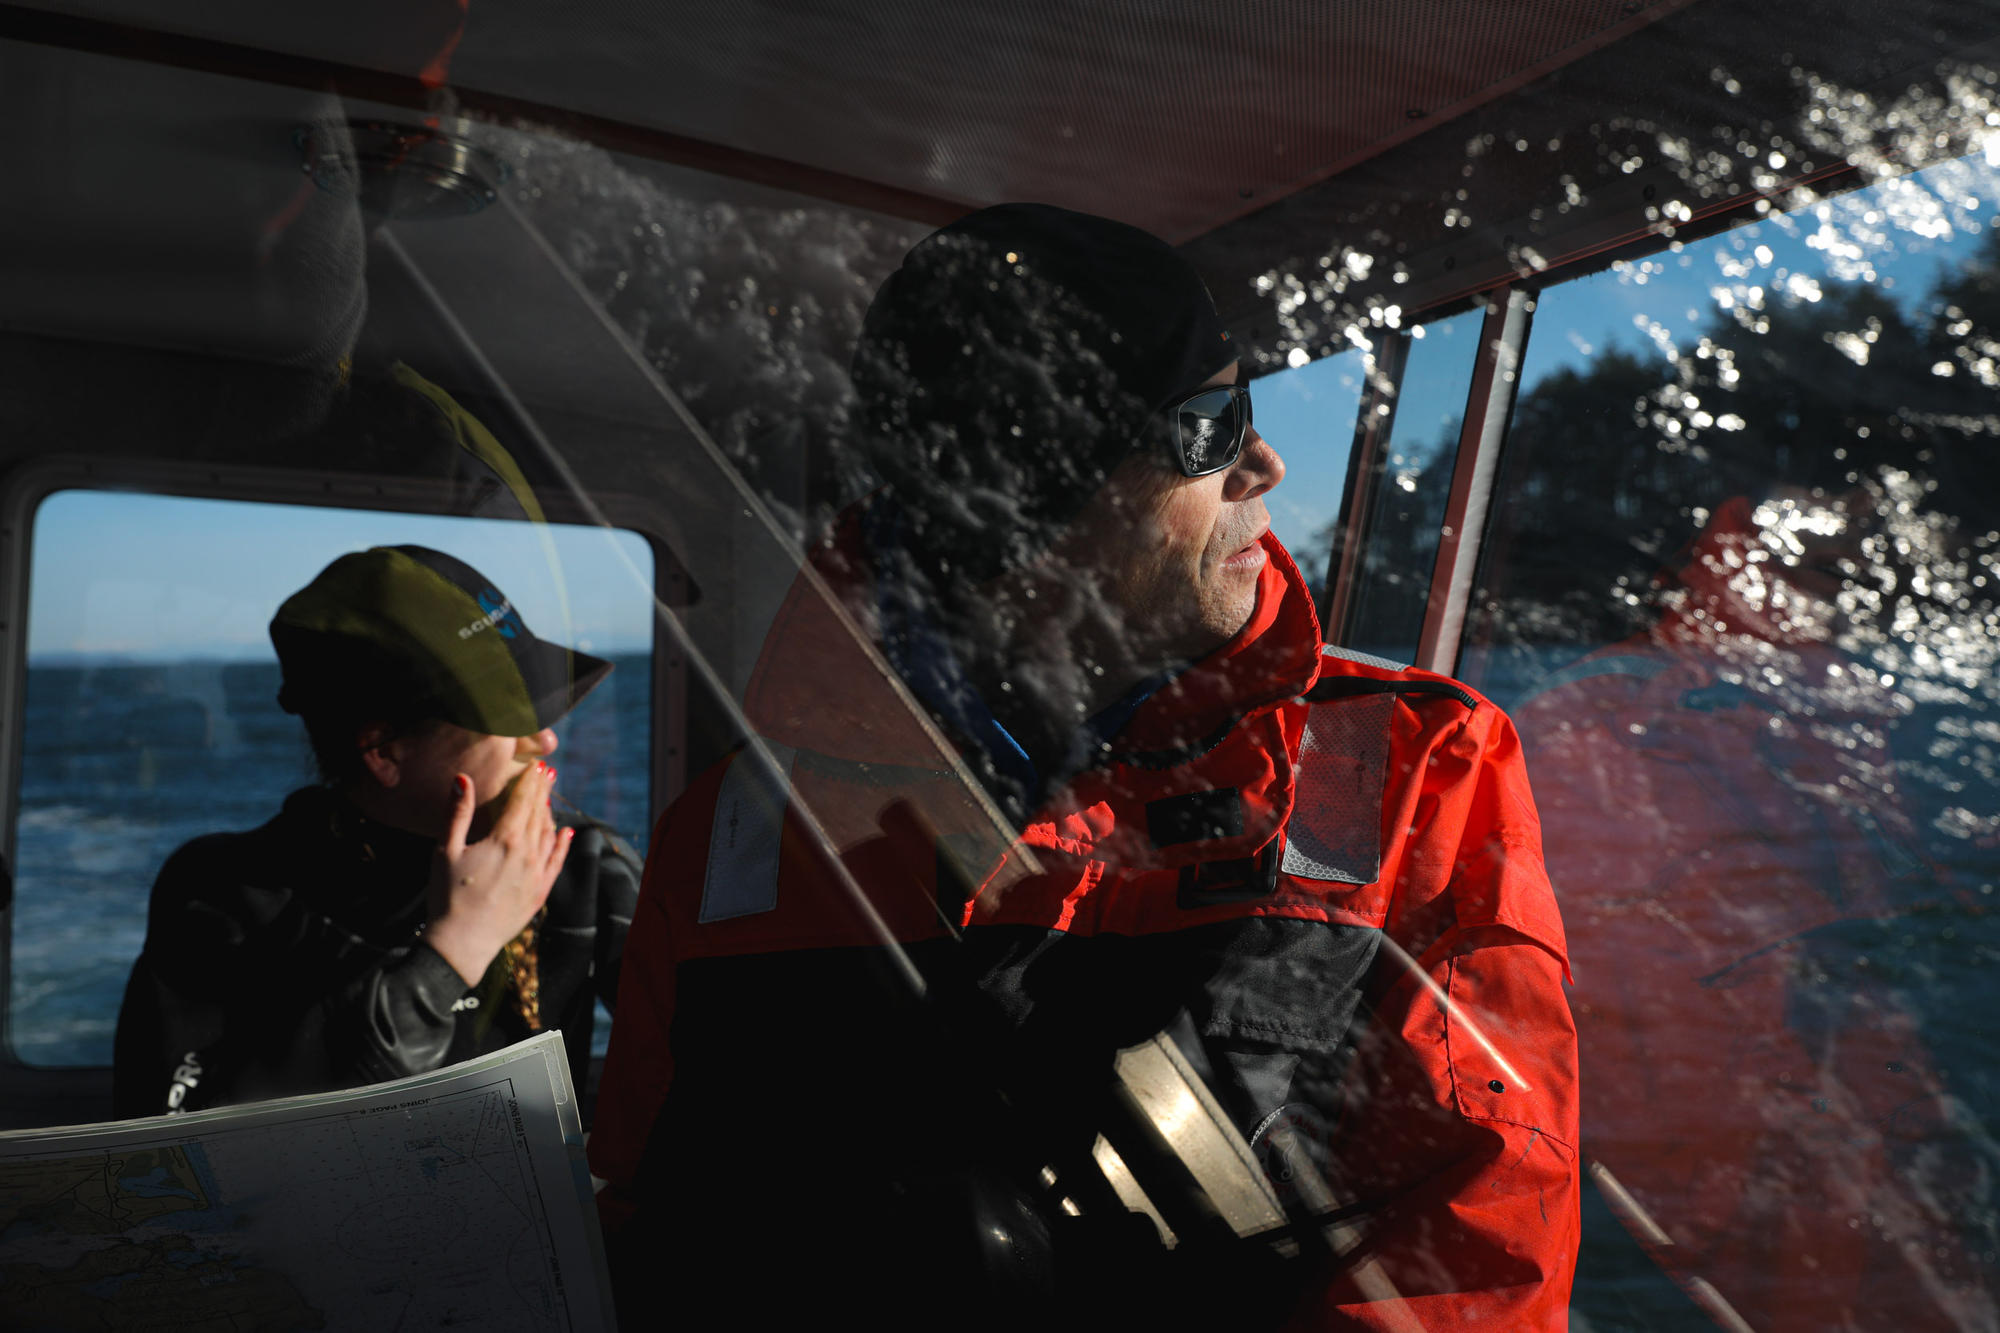 Water is reflected off glass as people inside the cabin of a boat look out toward the water